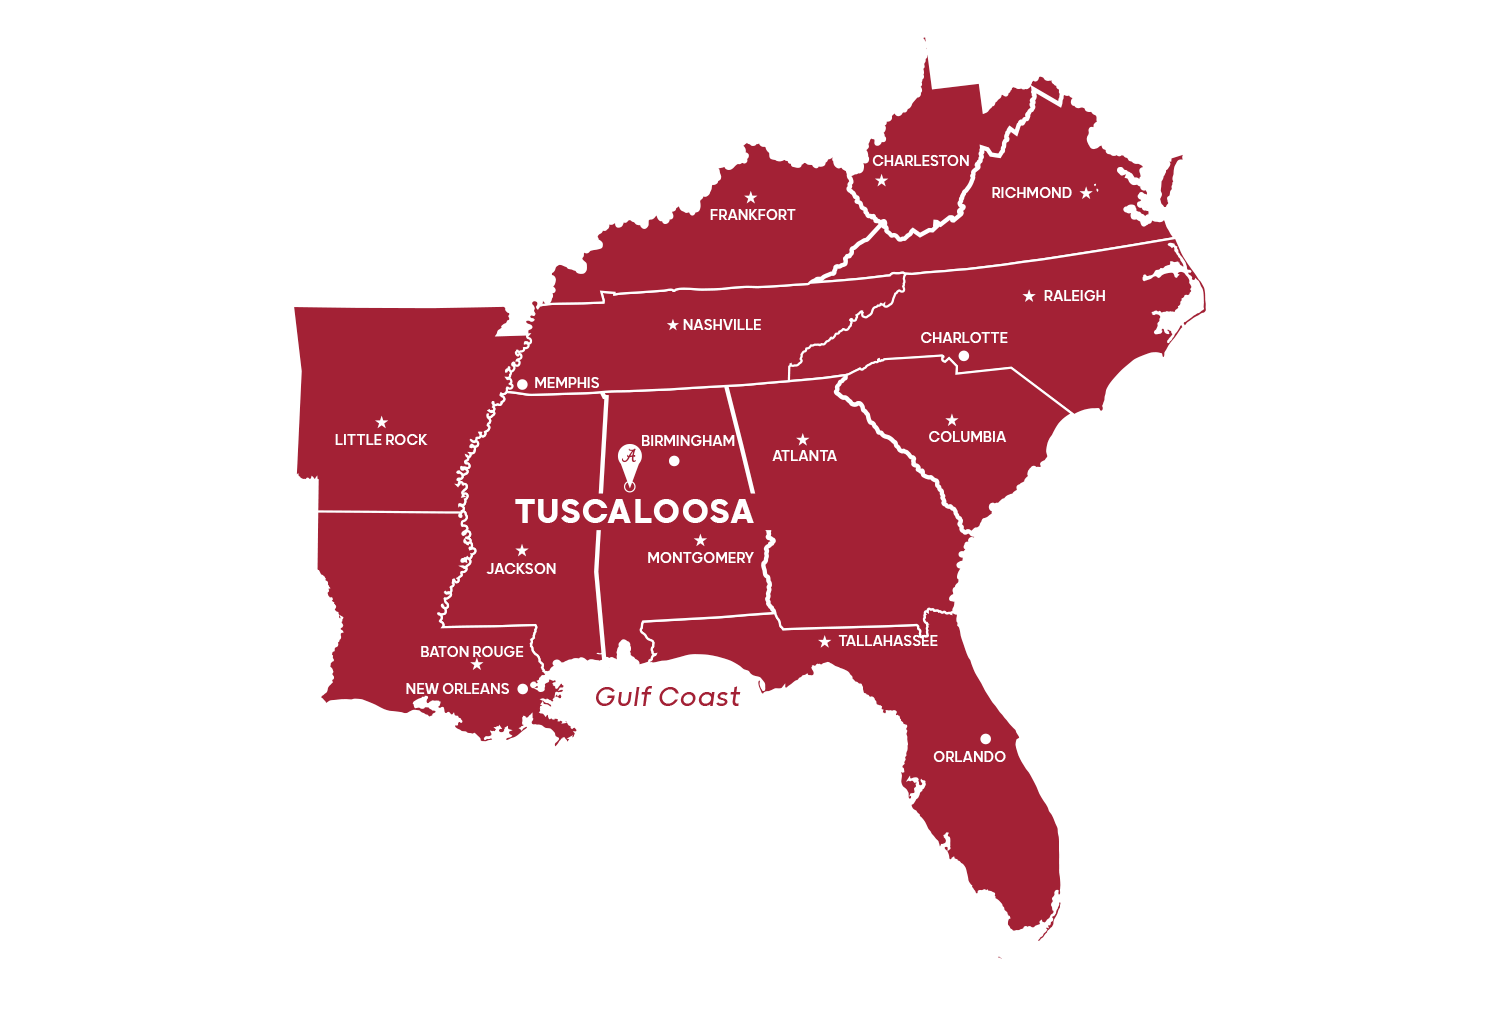 Regional map of the southeast. Tuscaloosa is in the center left part of Alabama